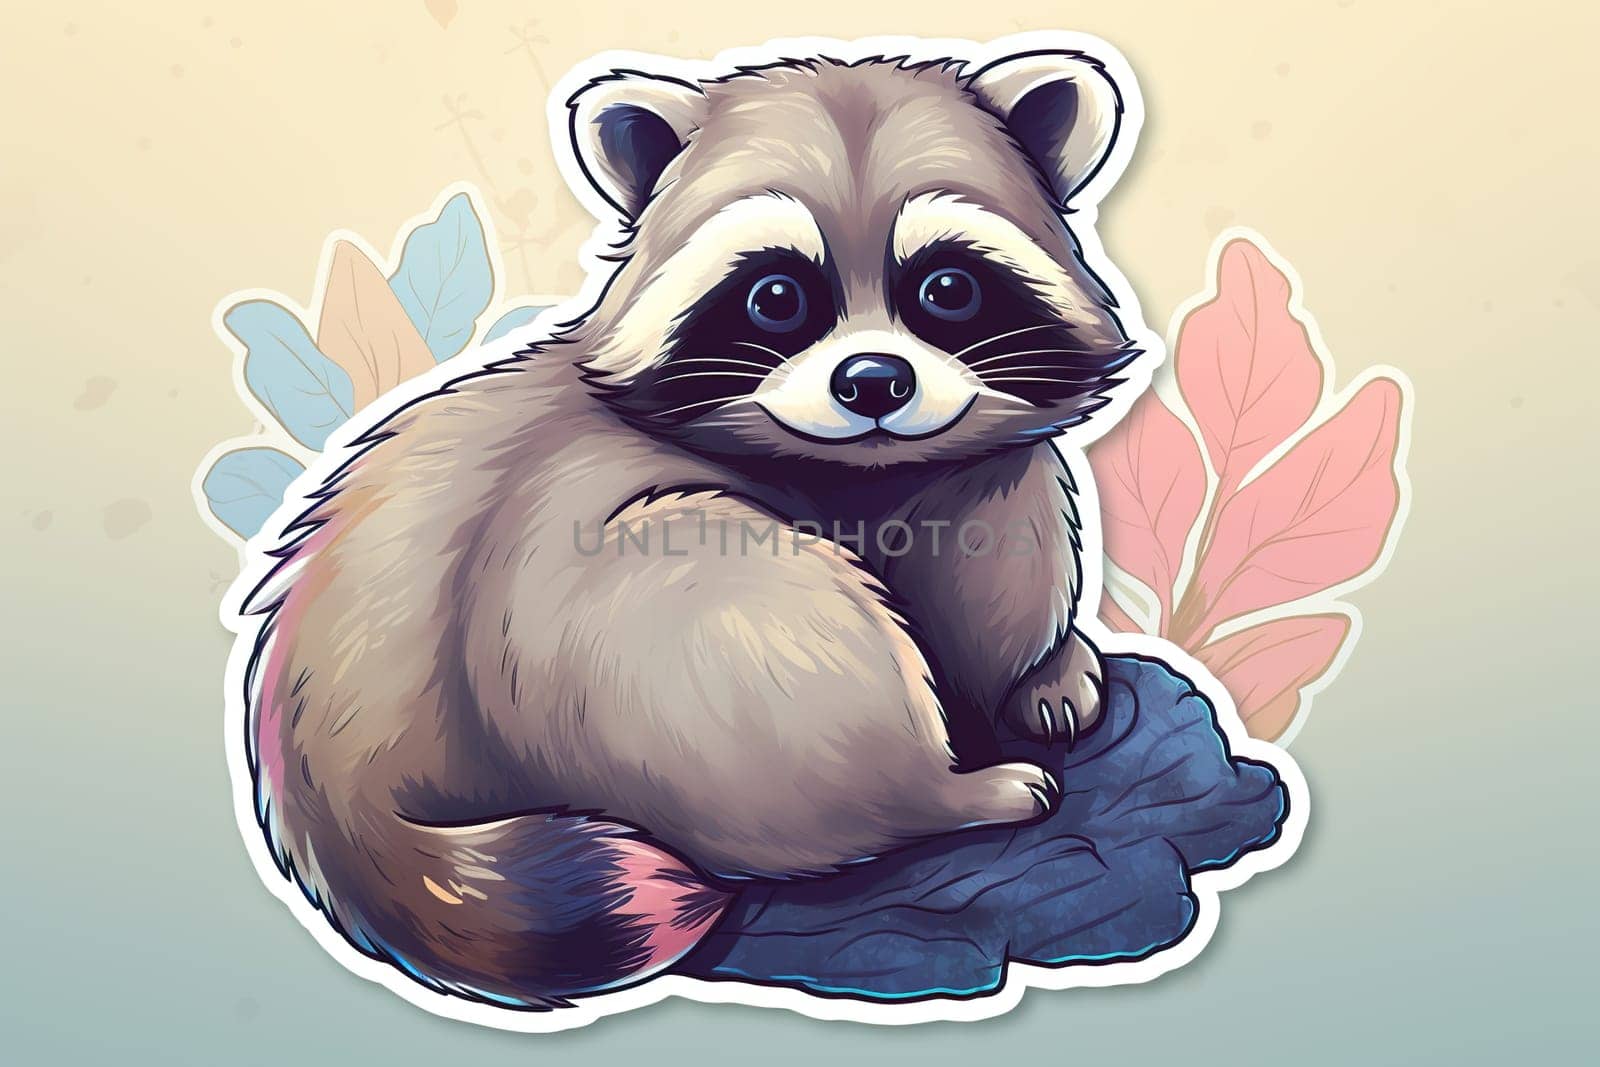 Cute racoon sticker by banate